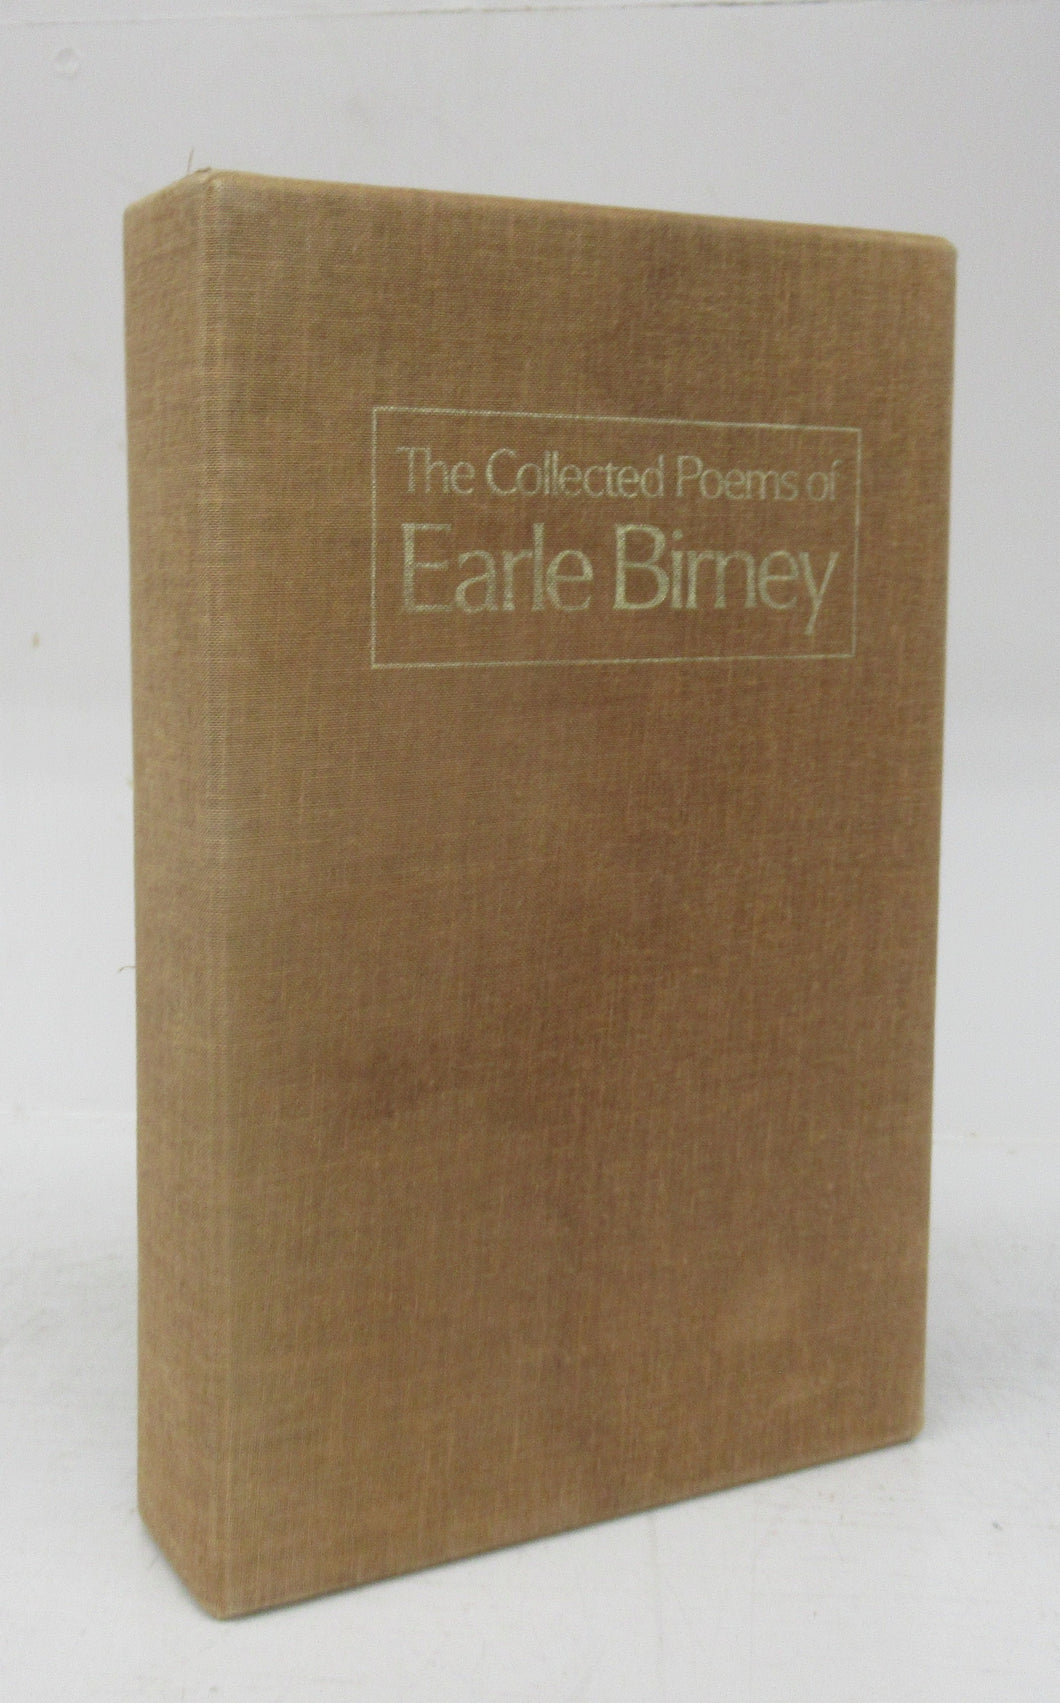 The Collected Poems of Earle Birney I & II